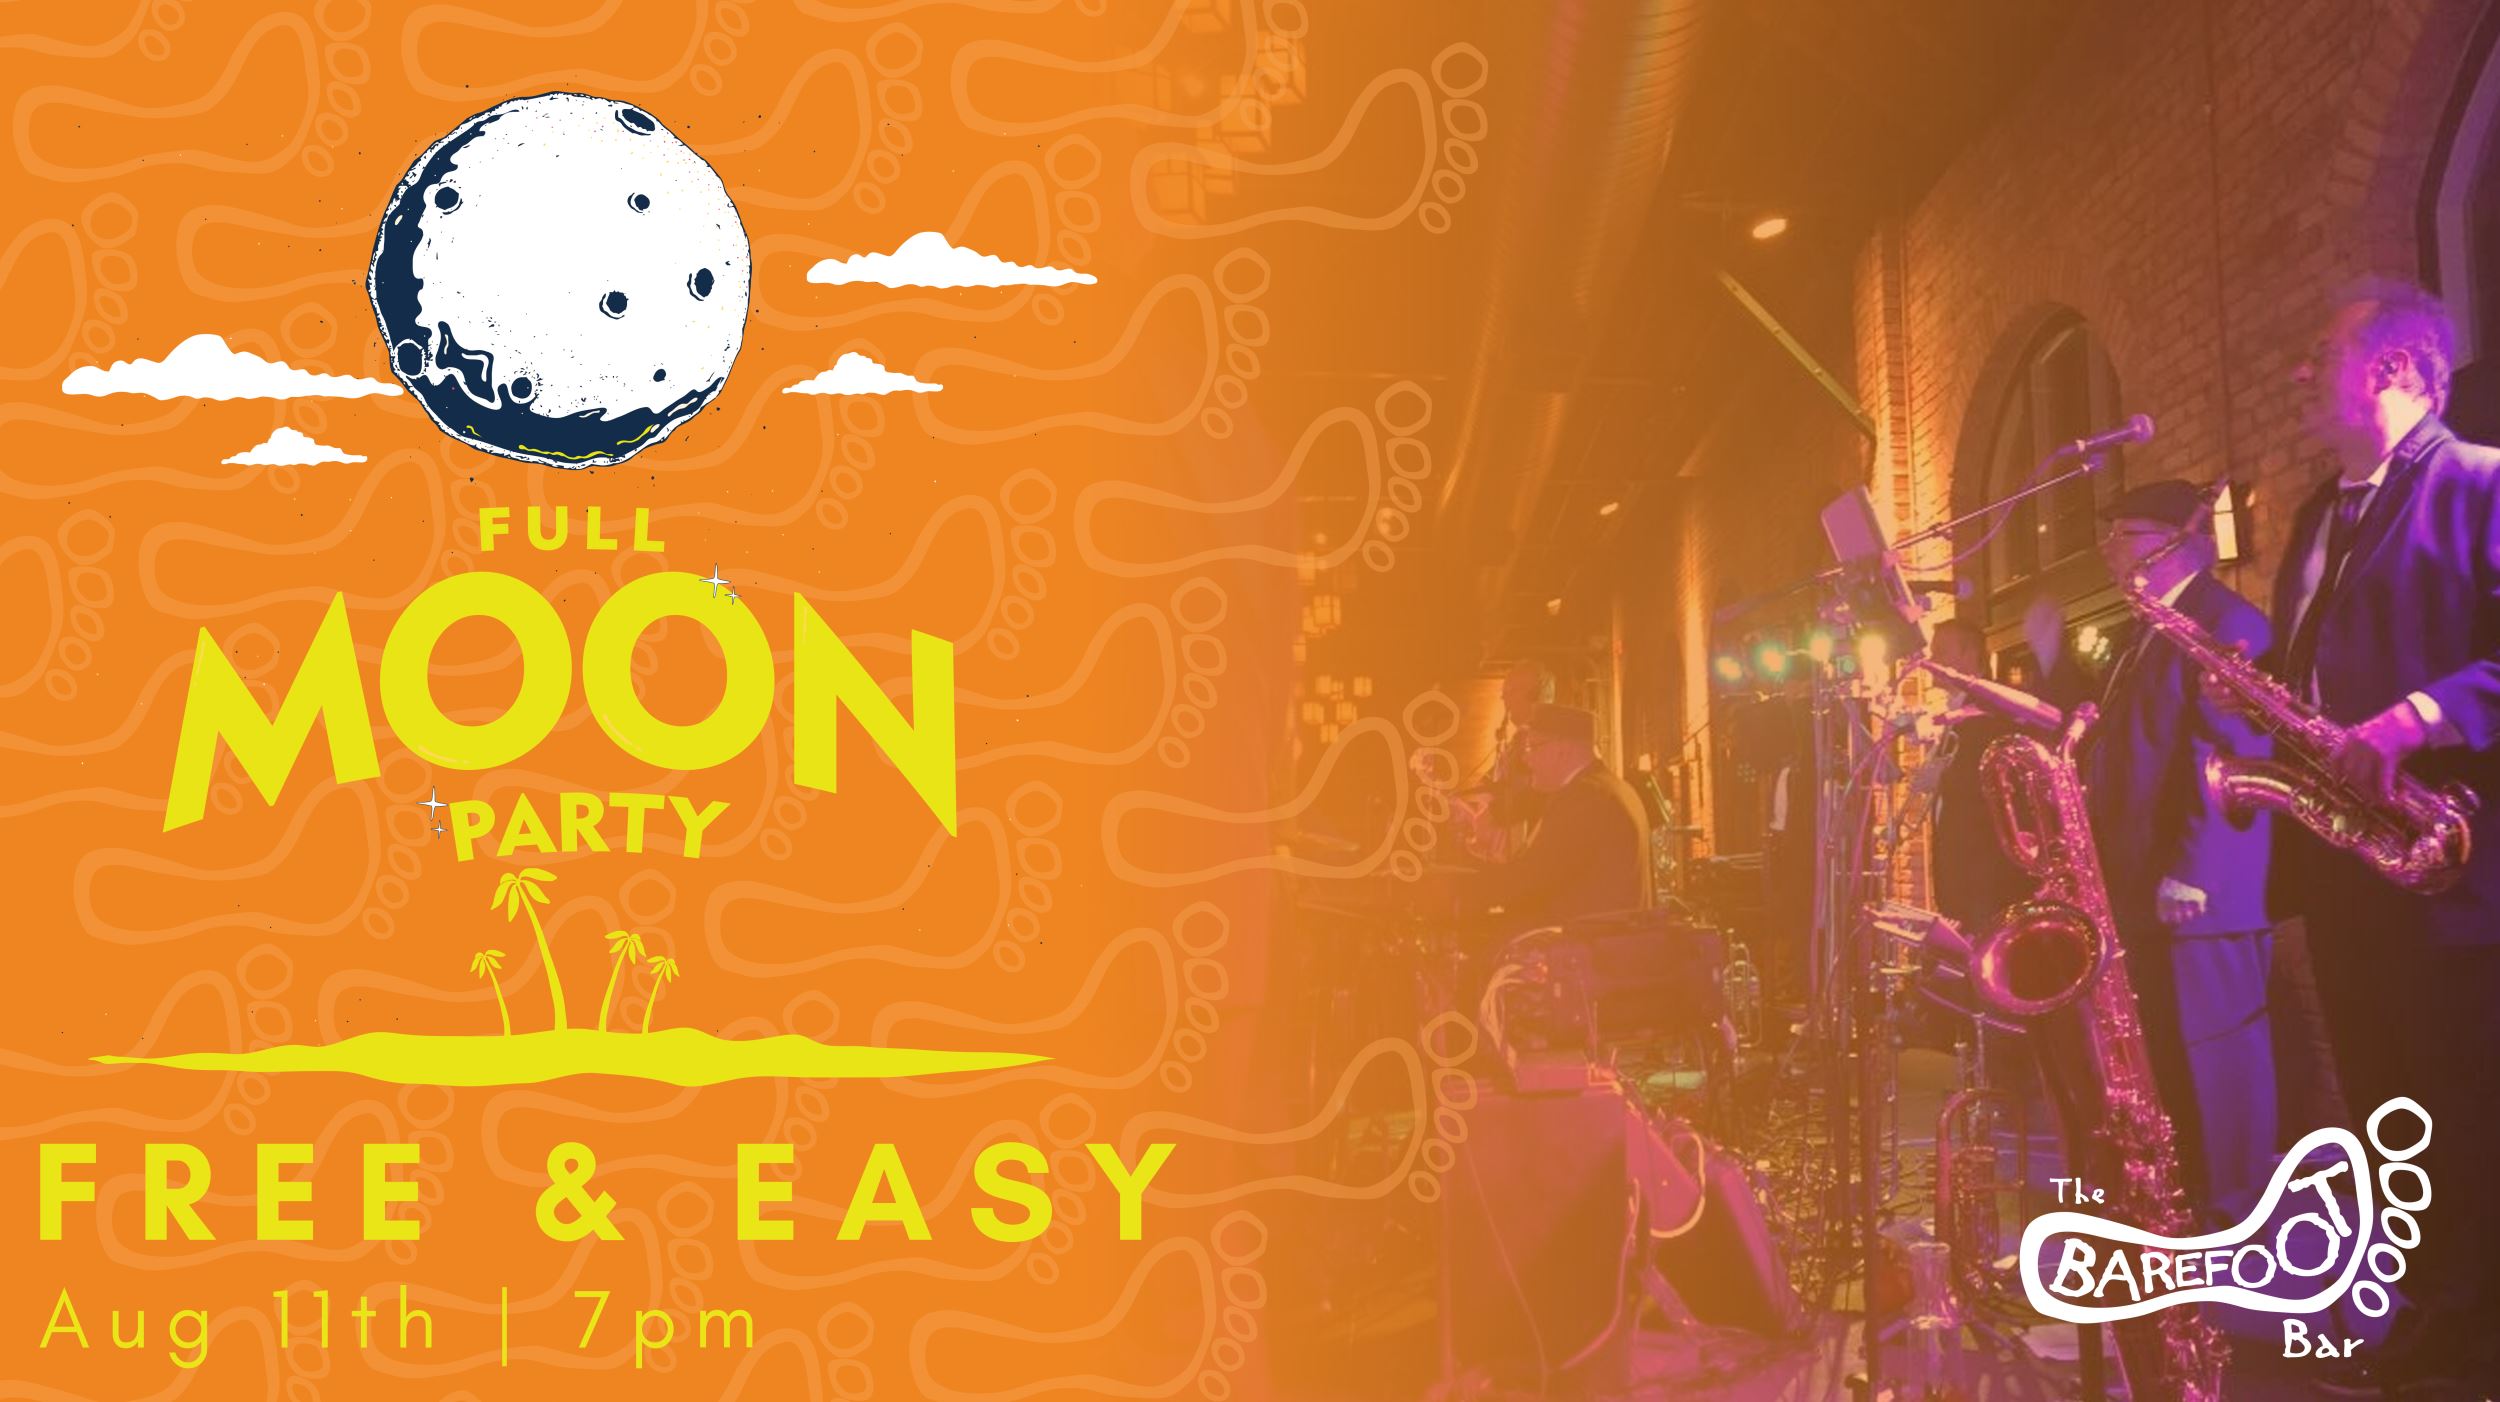 Full Moon Party with Free & Easy